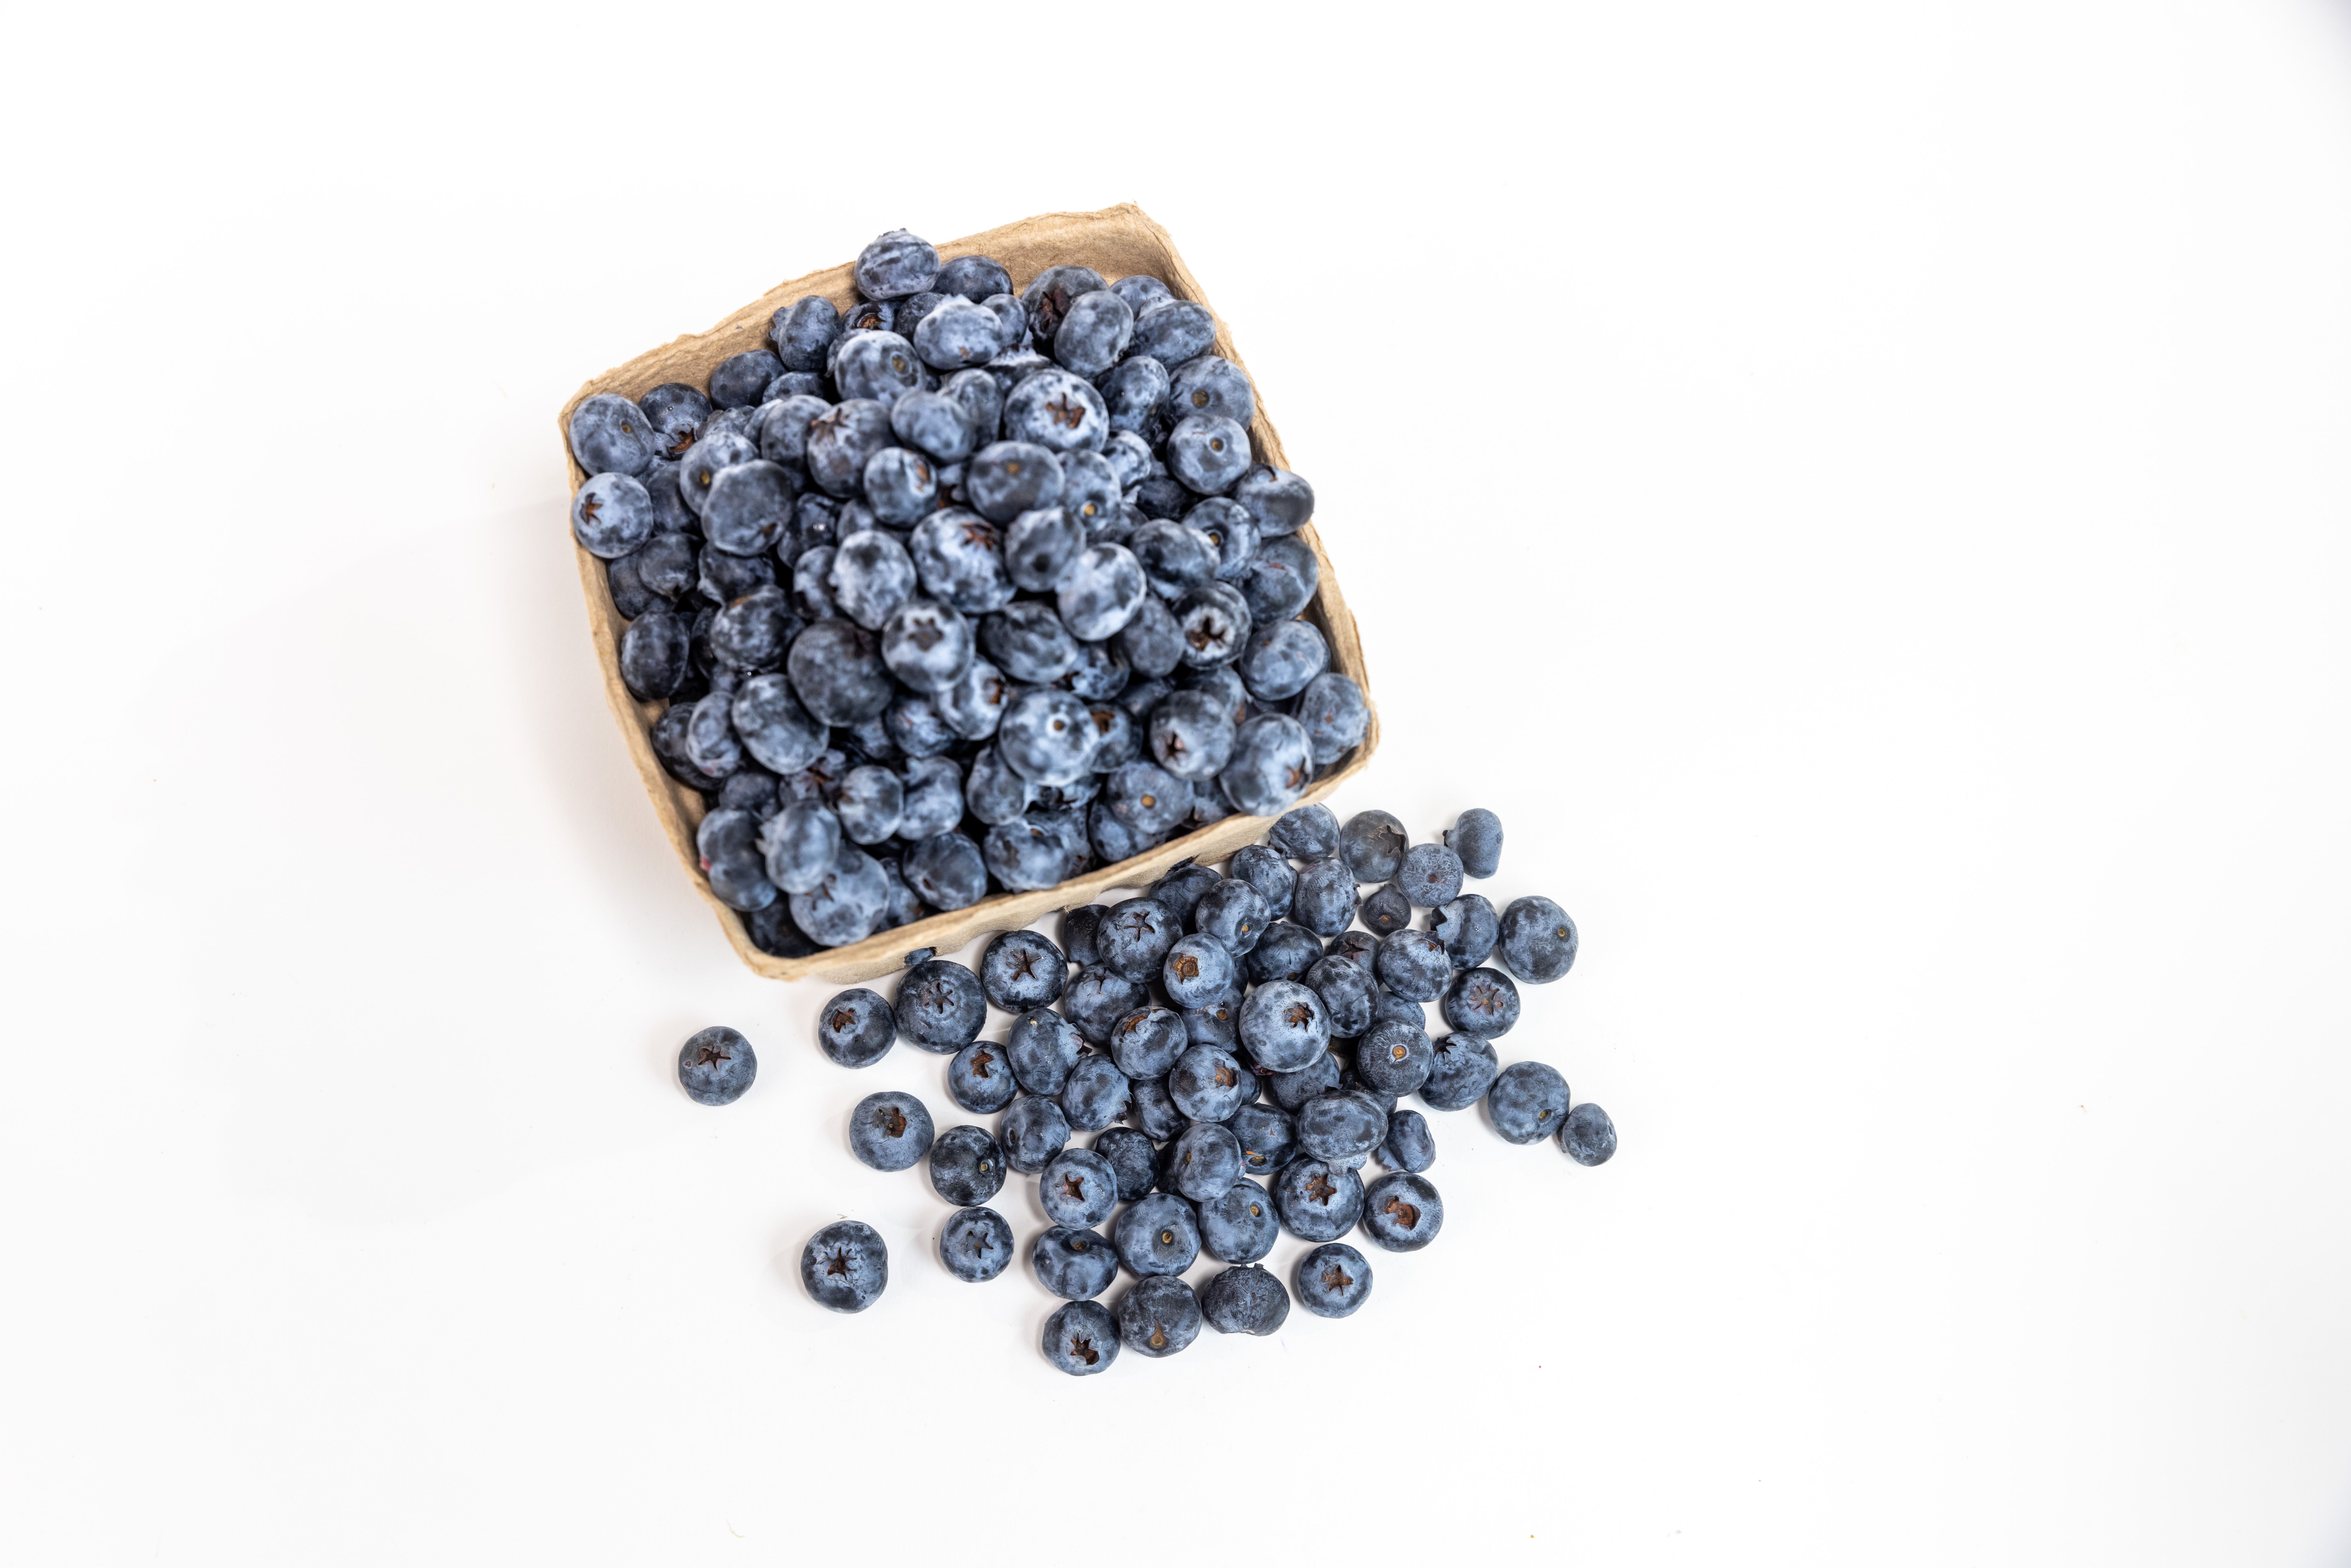 A crate of blueberries